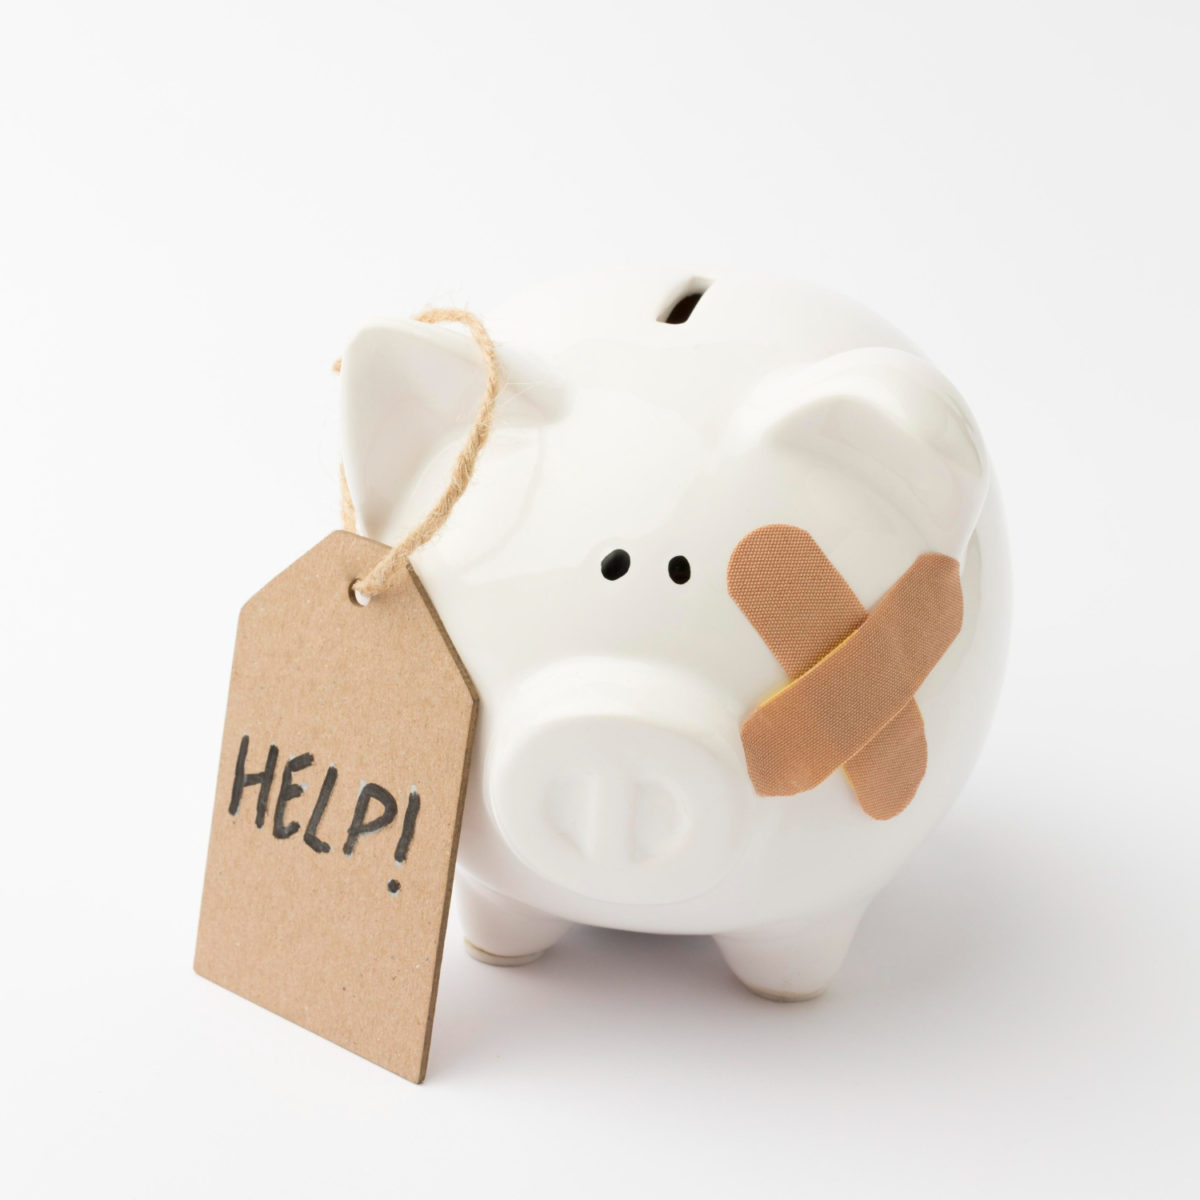 A Strategic Guide to Building an Emergency Fund